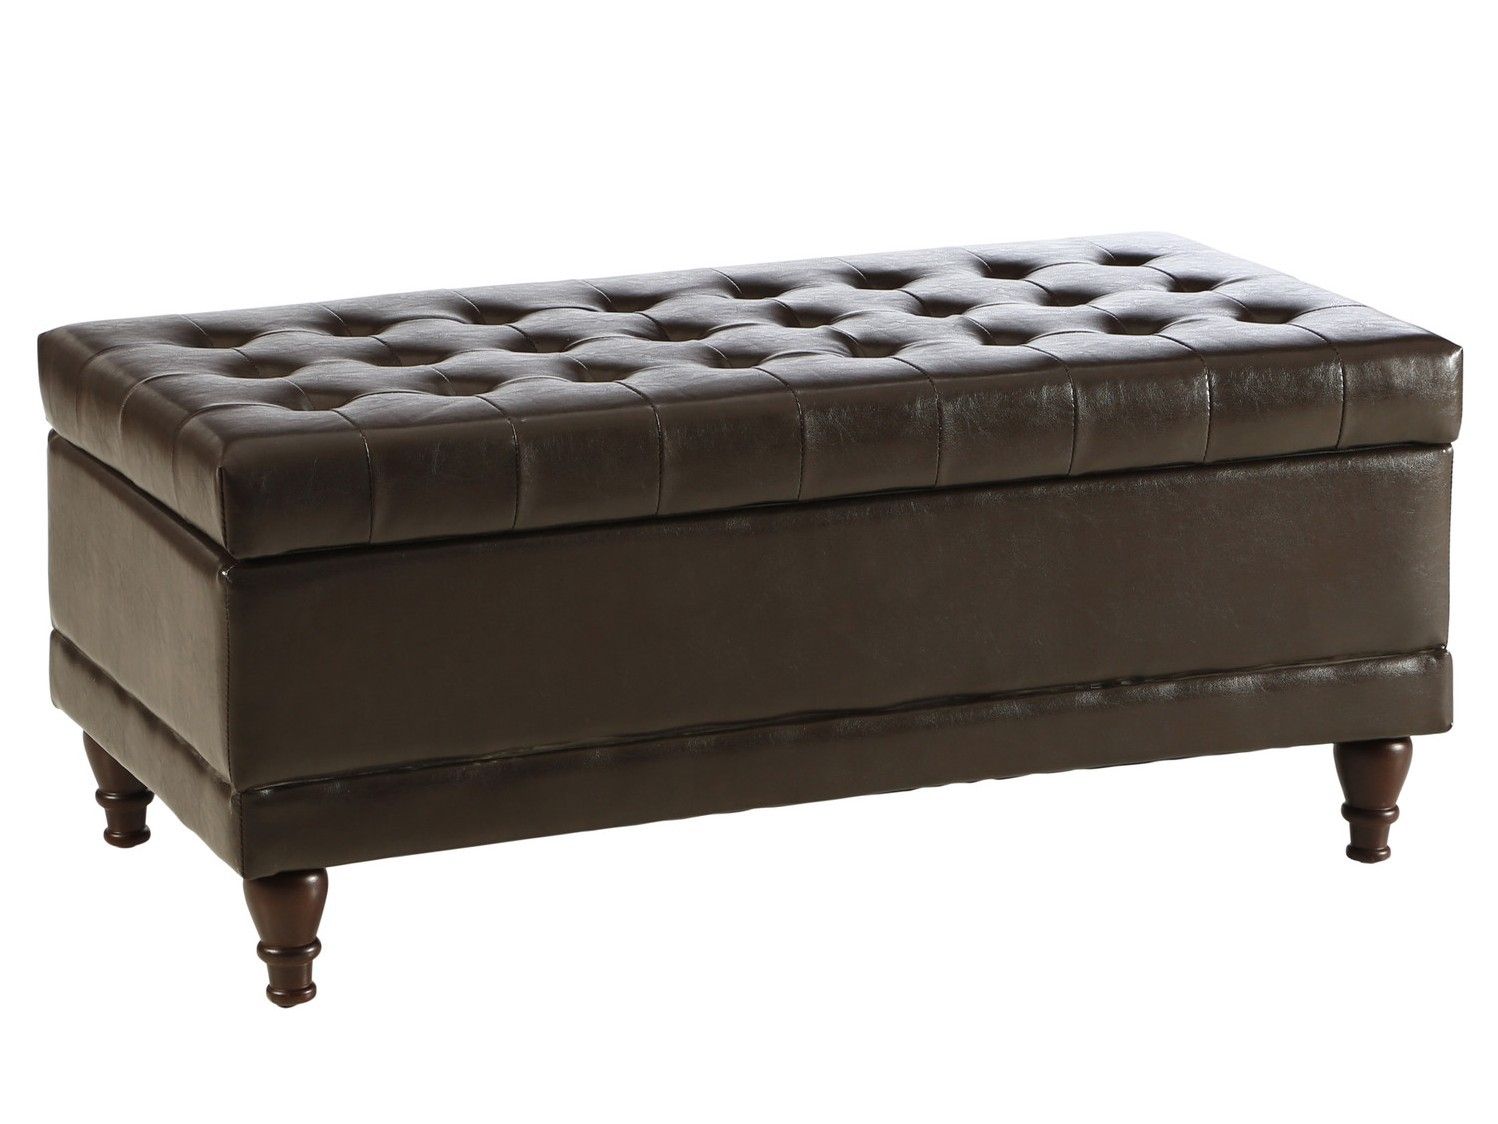 Tufted Ottoman Coffee Table Design Images Photos Pictures Throughout Tufted Ottoman Console Tables (View 17 of 20)